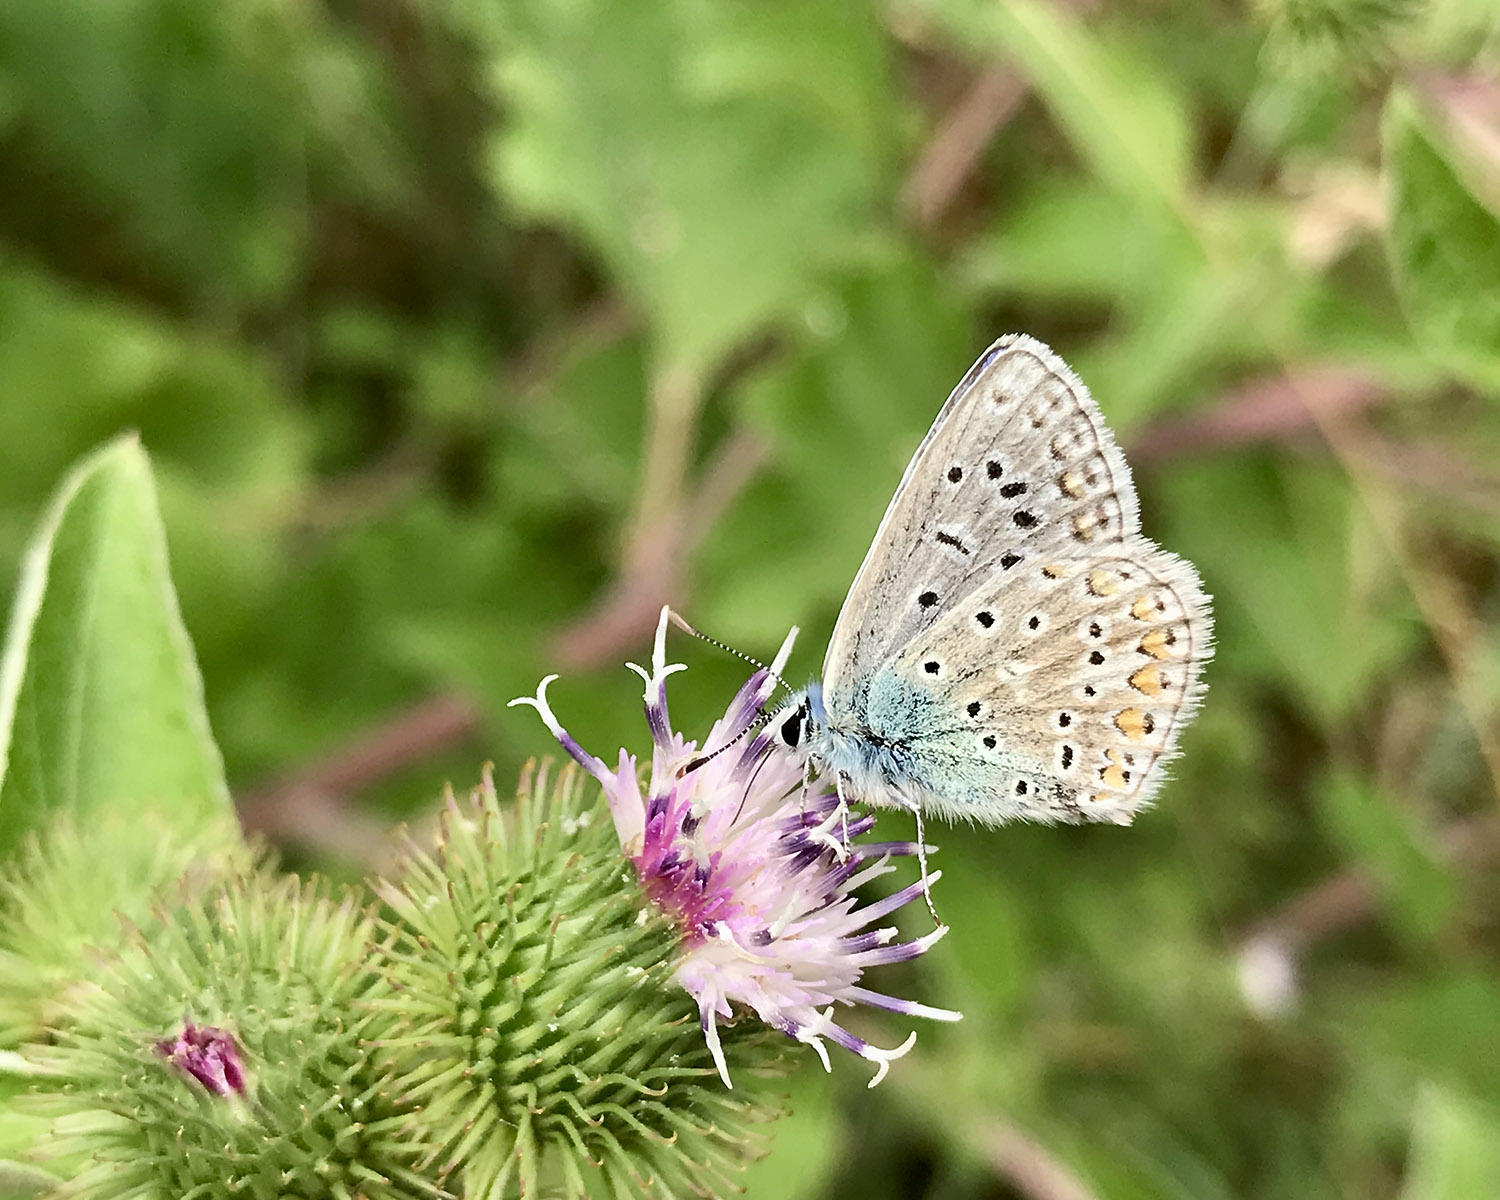 A Large Blue butterfly on a thistle flower